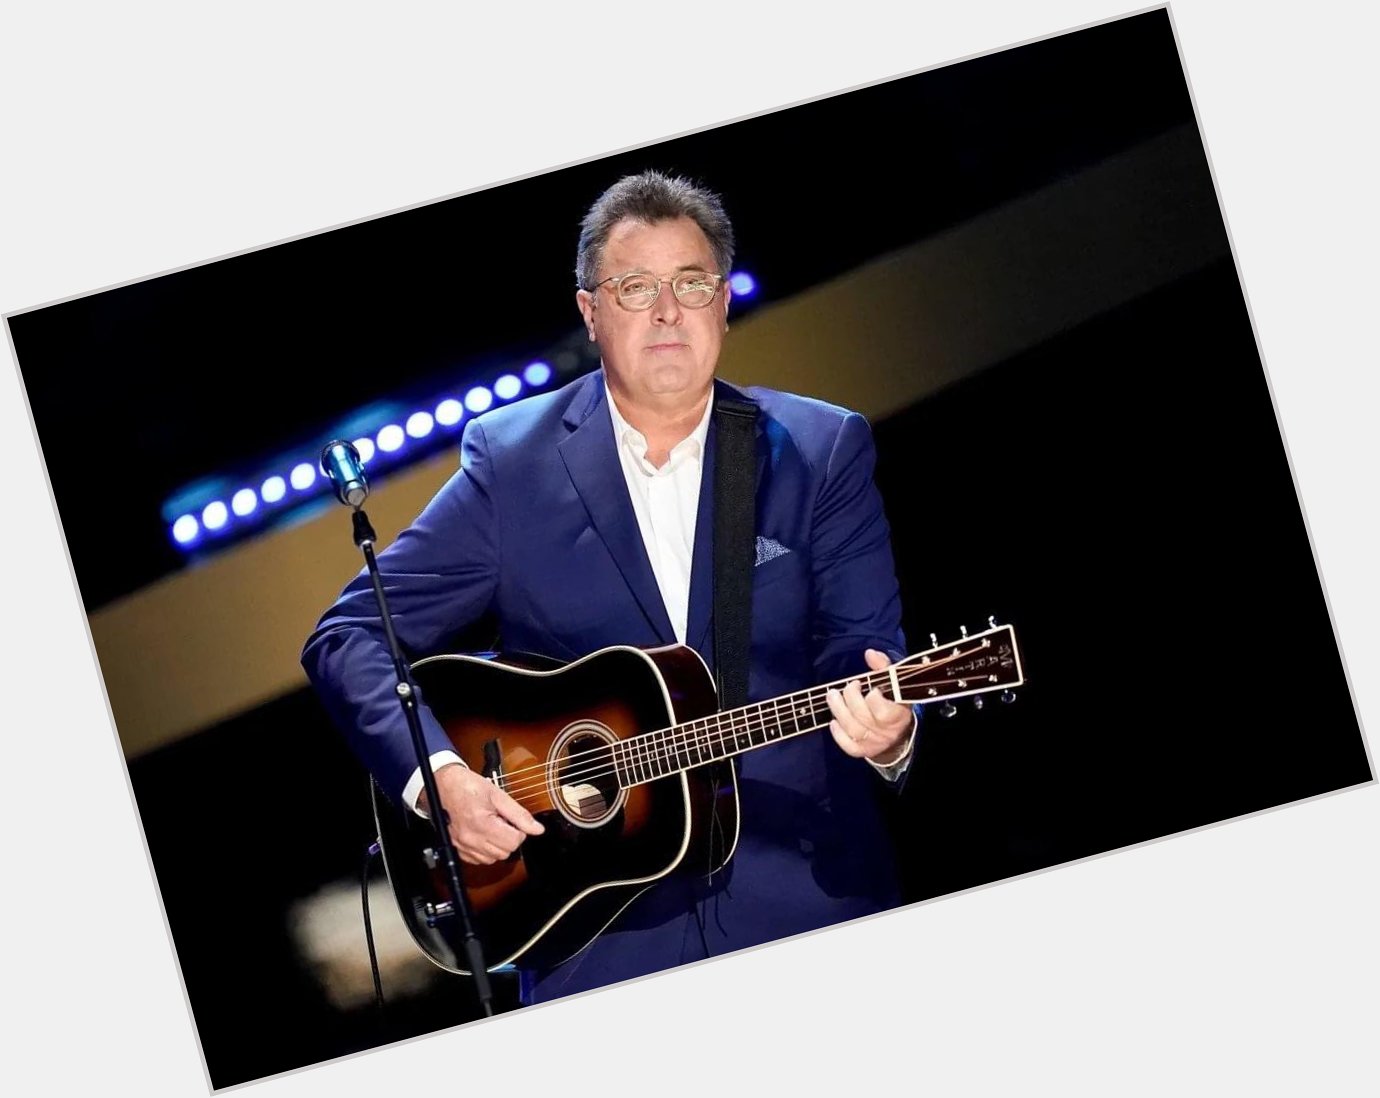 A big happy birthday to singer, songwriter & musician, Vince Gill, who turns 66 today! - Matt    